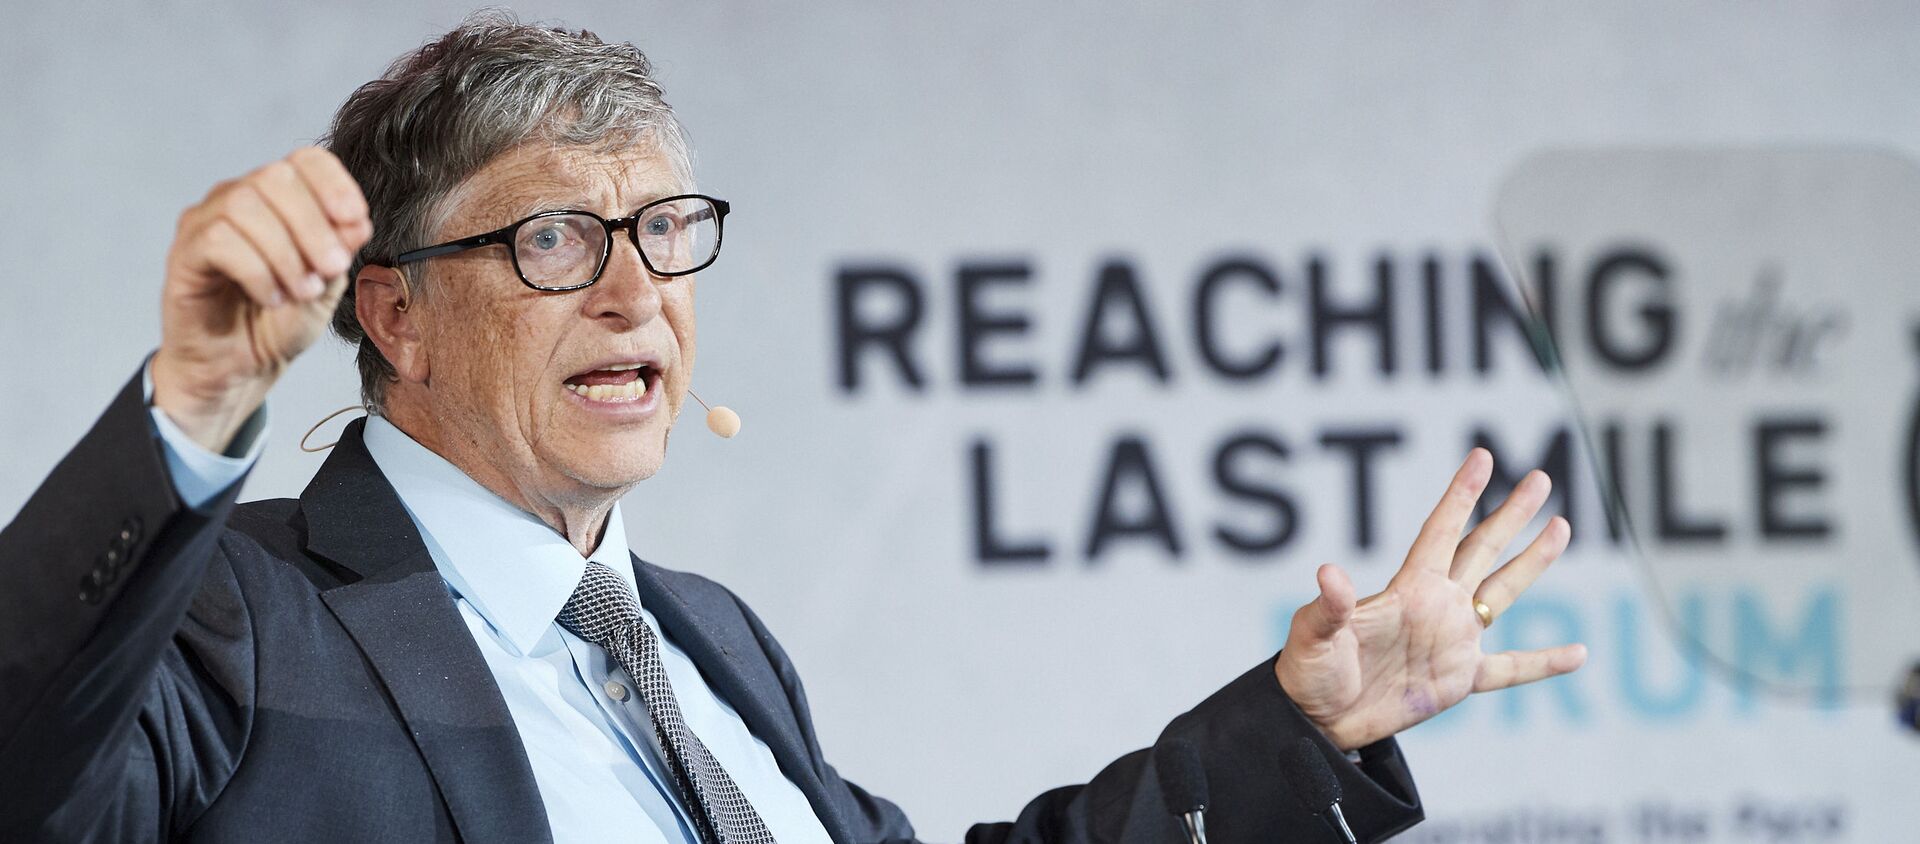  Microsoft founder and Co- chair of the Bill and Melinda Gates Foundation, Bill Gates is pictured at the Reaching The Last Mile forum on Nov. 19, 2019, at the Louvre in Abu Dhabi - Sputnik International, 1920, 19.02.2021